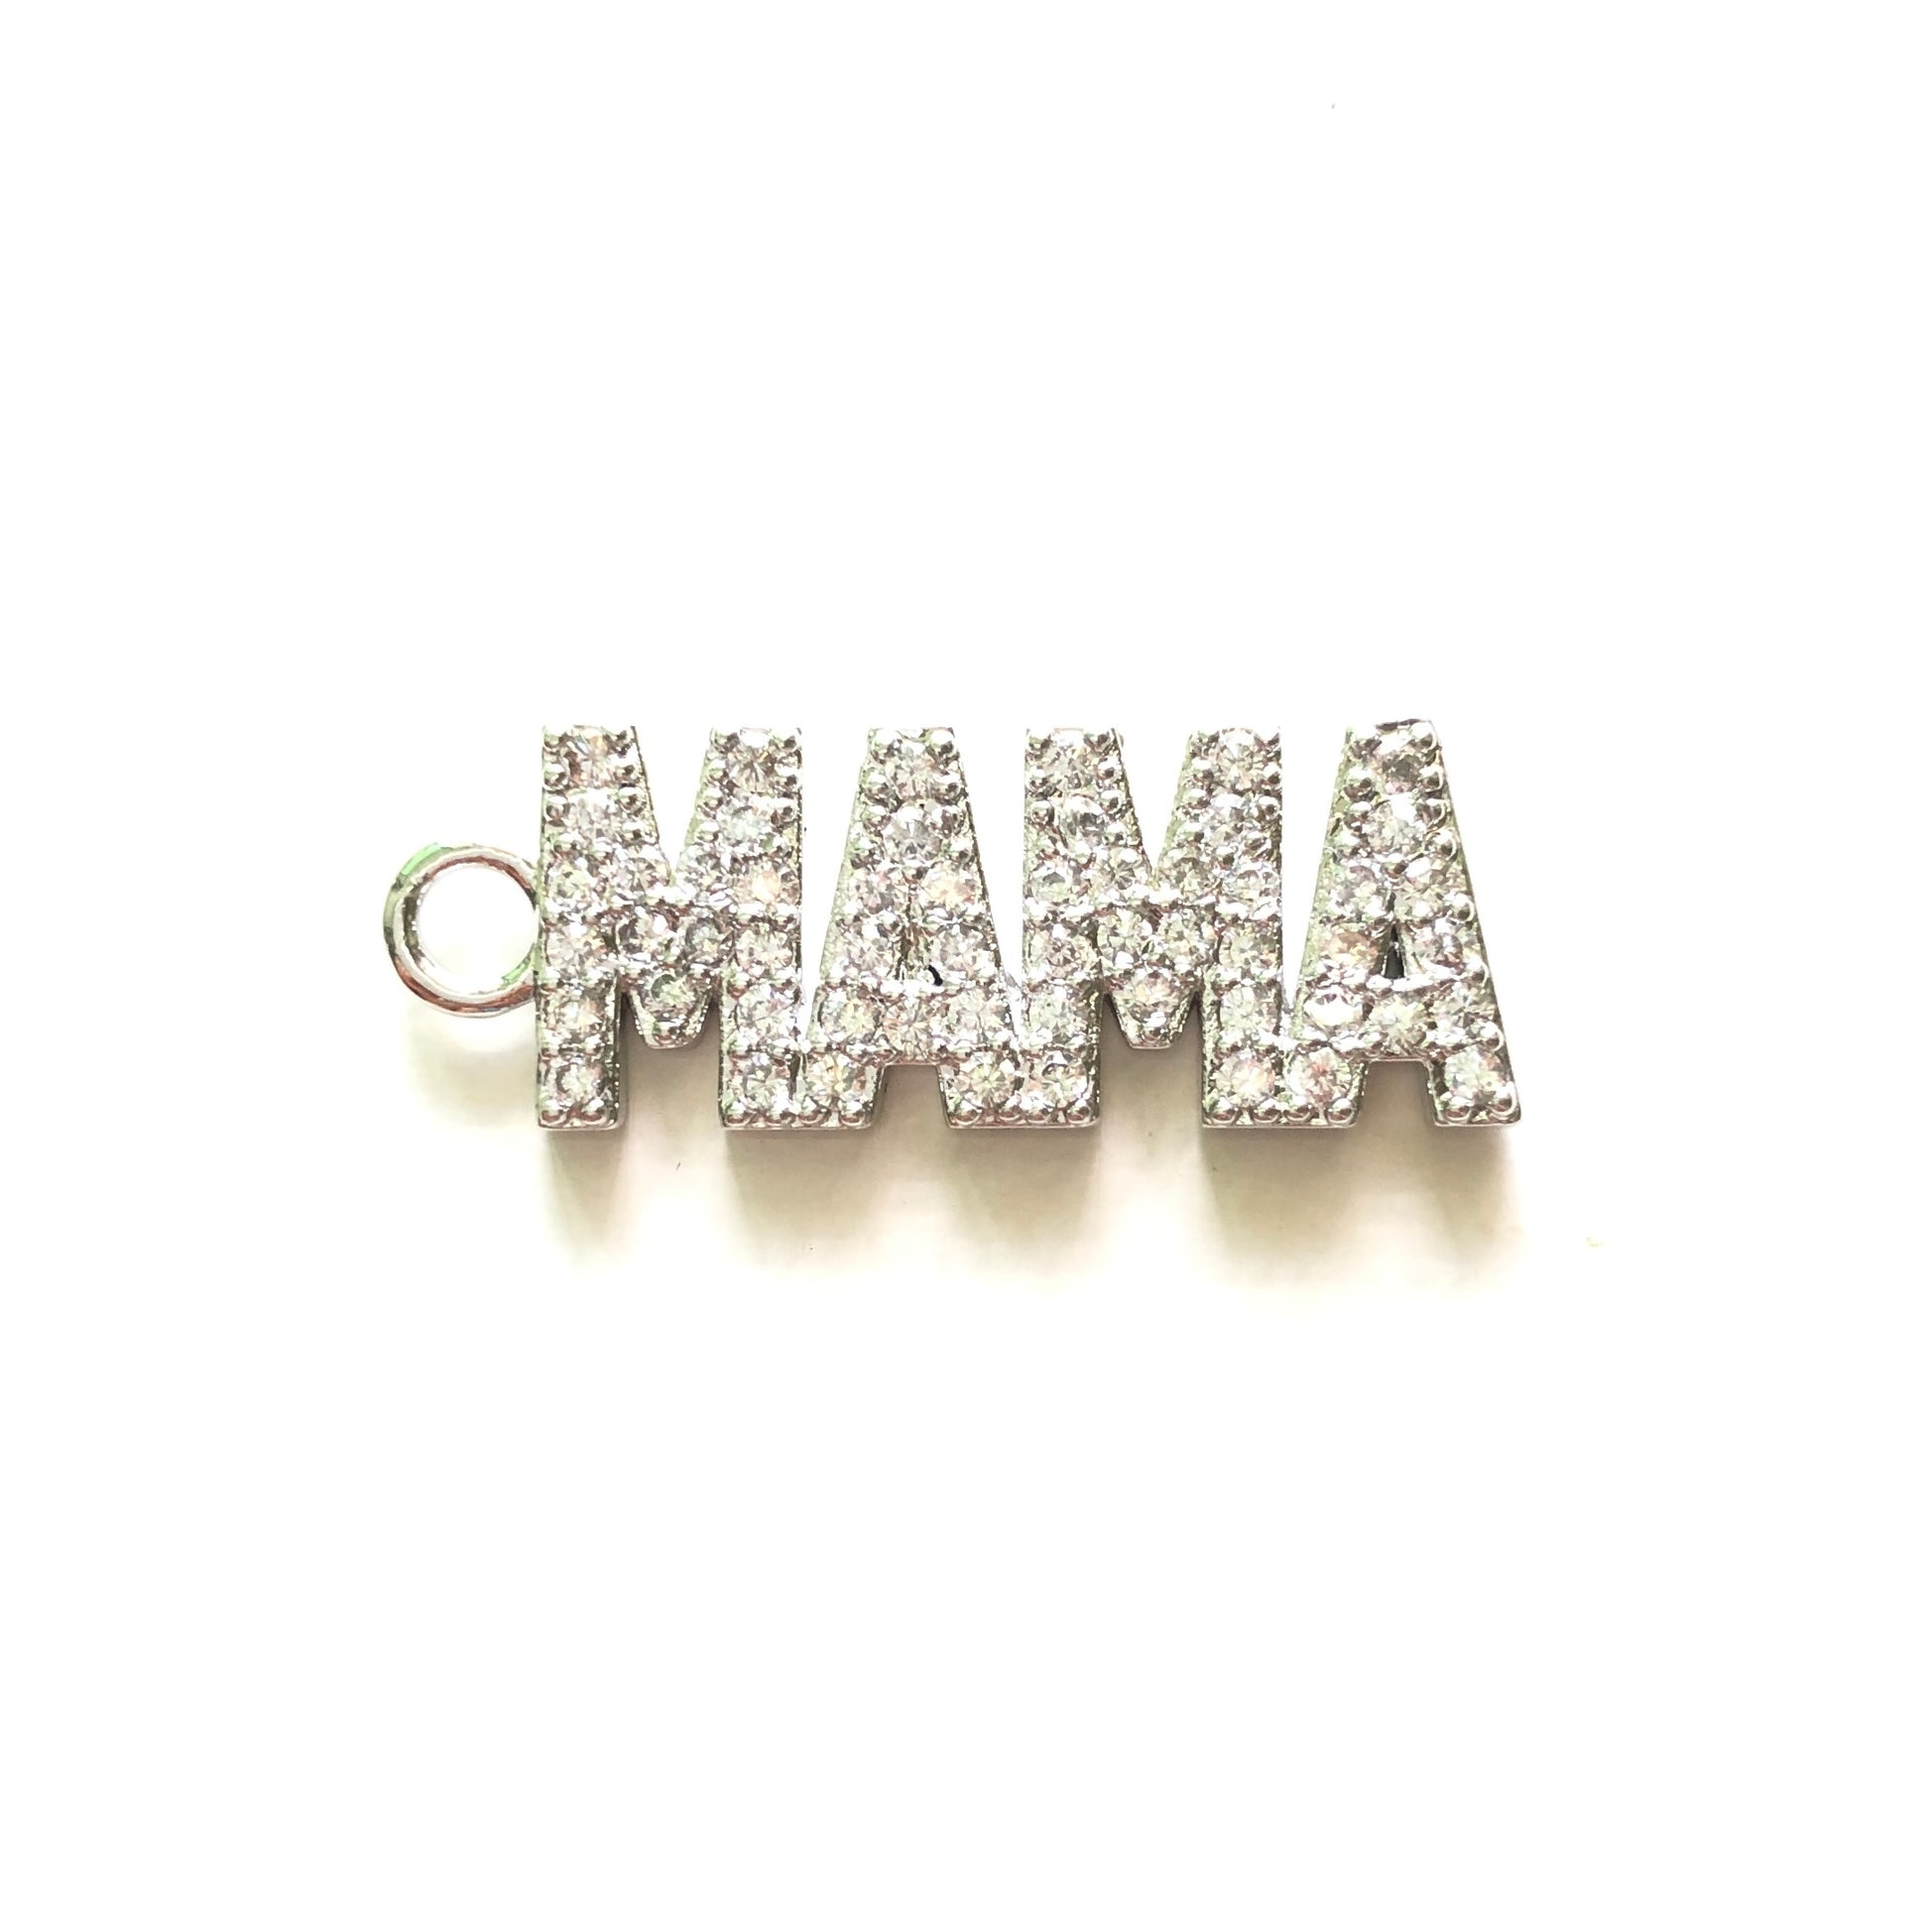 10pcs/lot 31*11mm CZ Paved Mama Charms for Mother's Day Silver CZ Paved Charms Mother's Day Words & Quotes Charms Beads Beyond